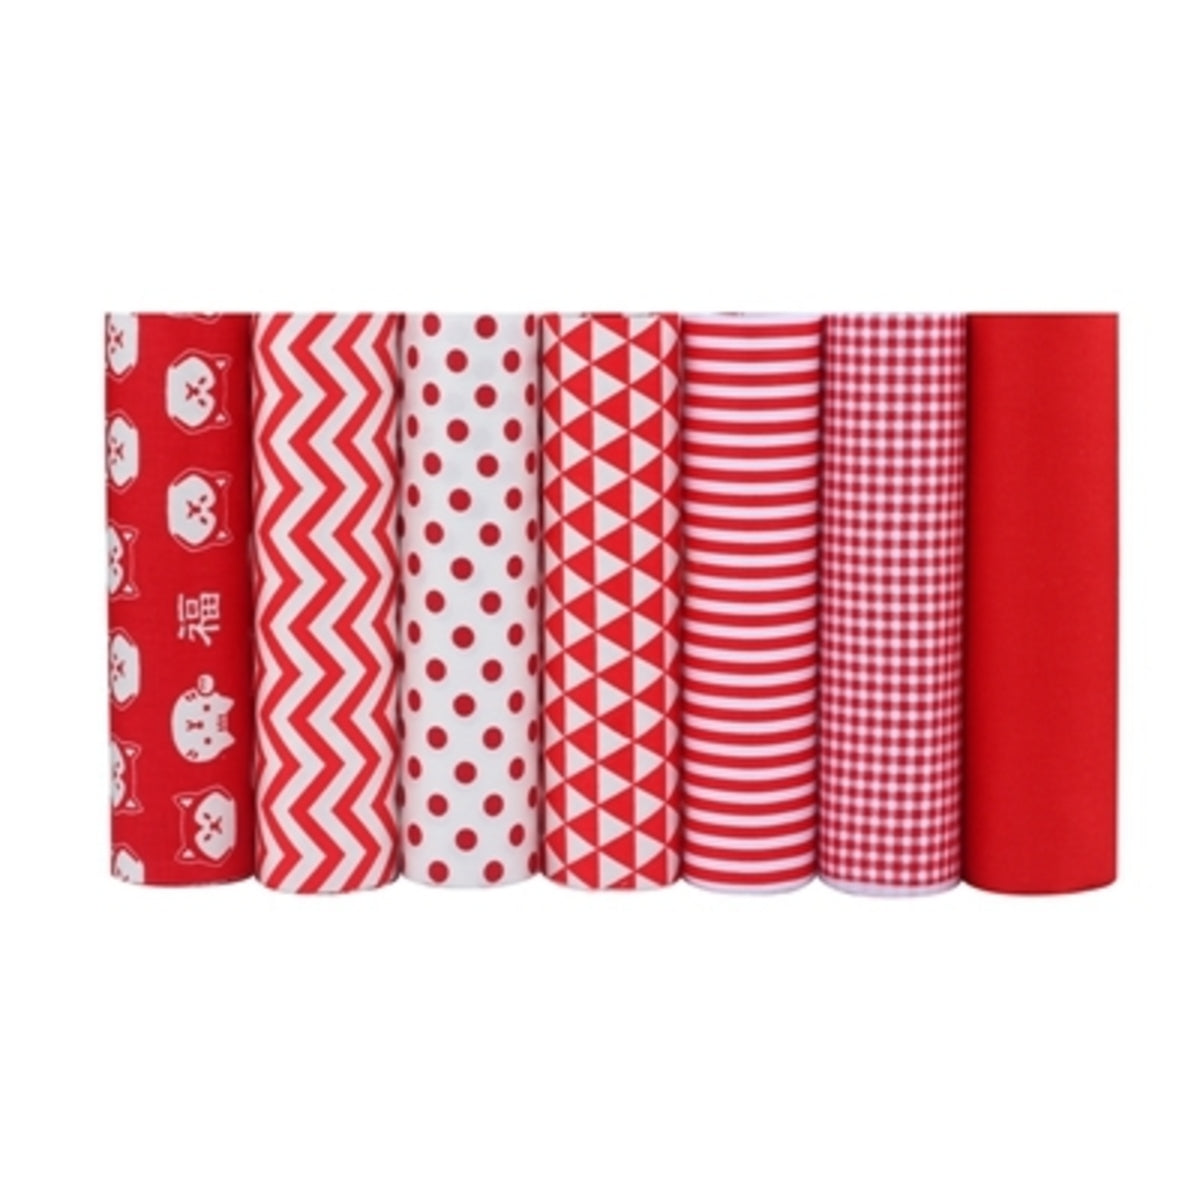 CraftsFabrics 7 pcs Red and White Printed Cotton Fat Quarters